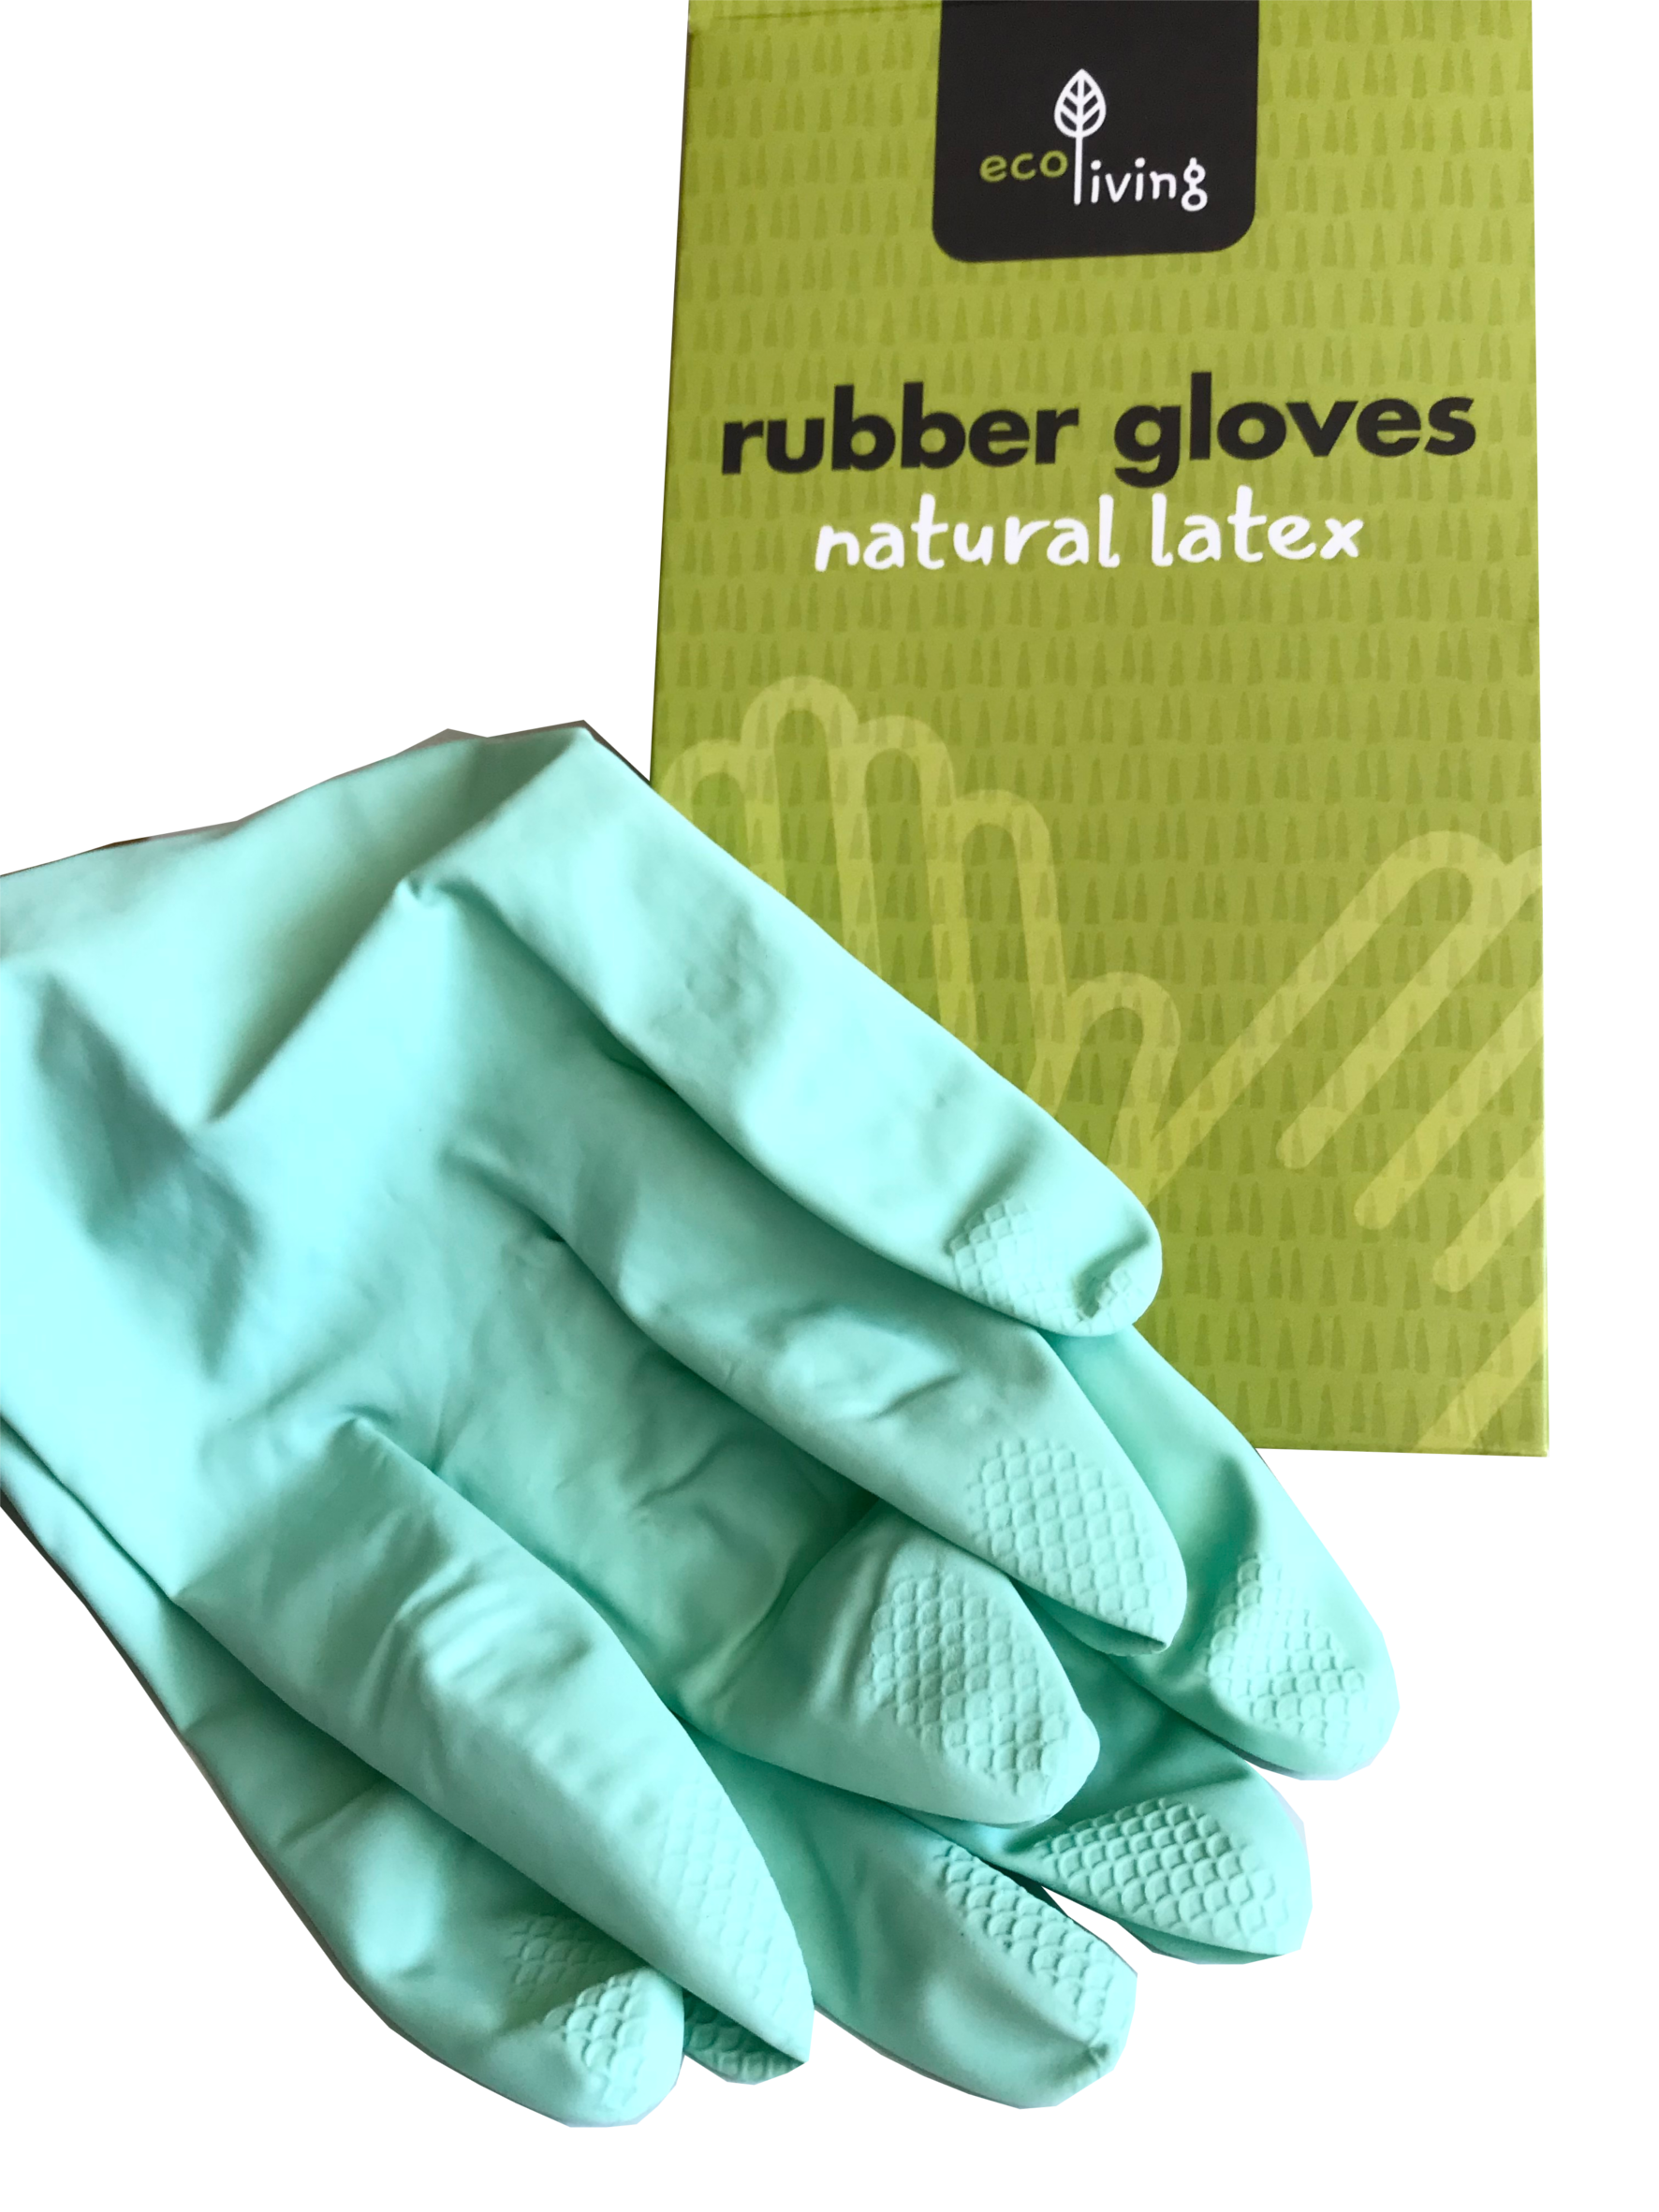 Light green rubber gloves with green card packaging showing rubber gloves natural latex